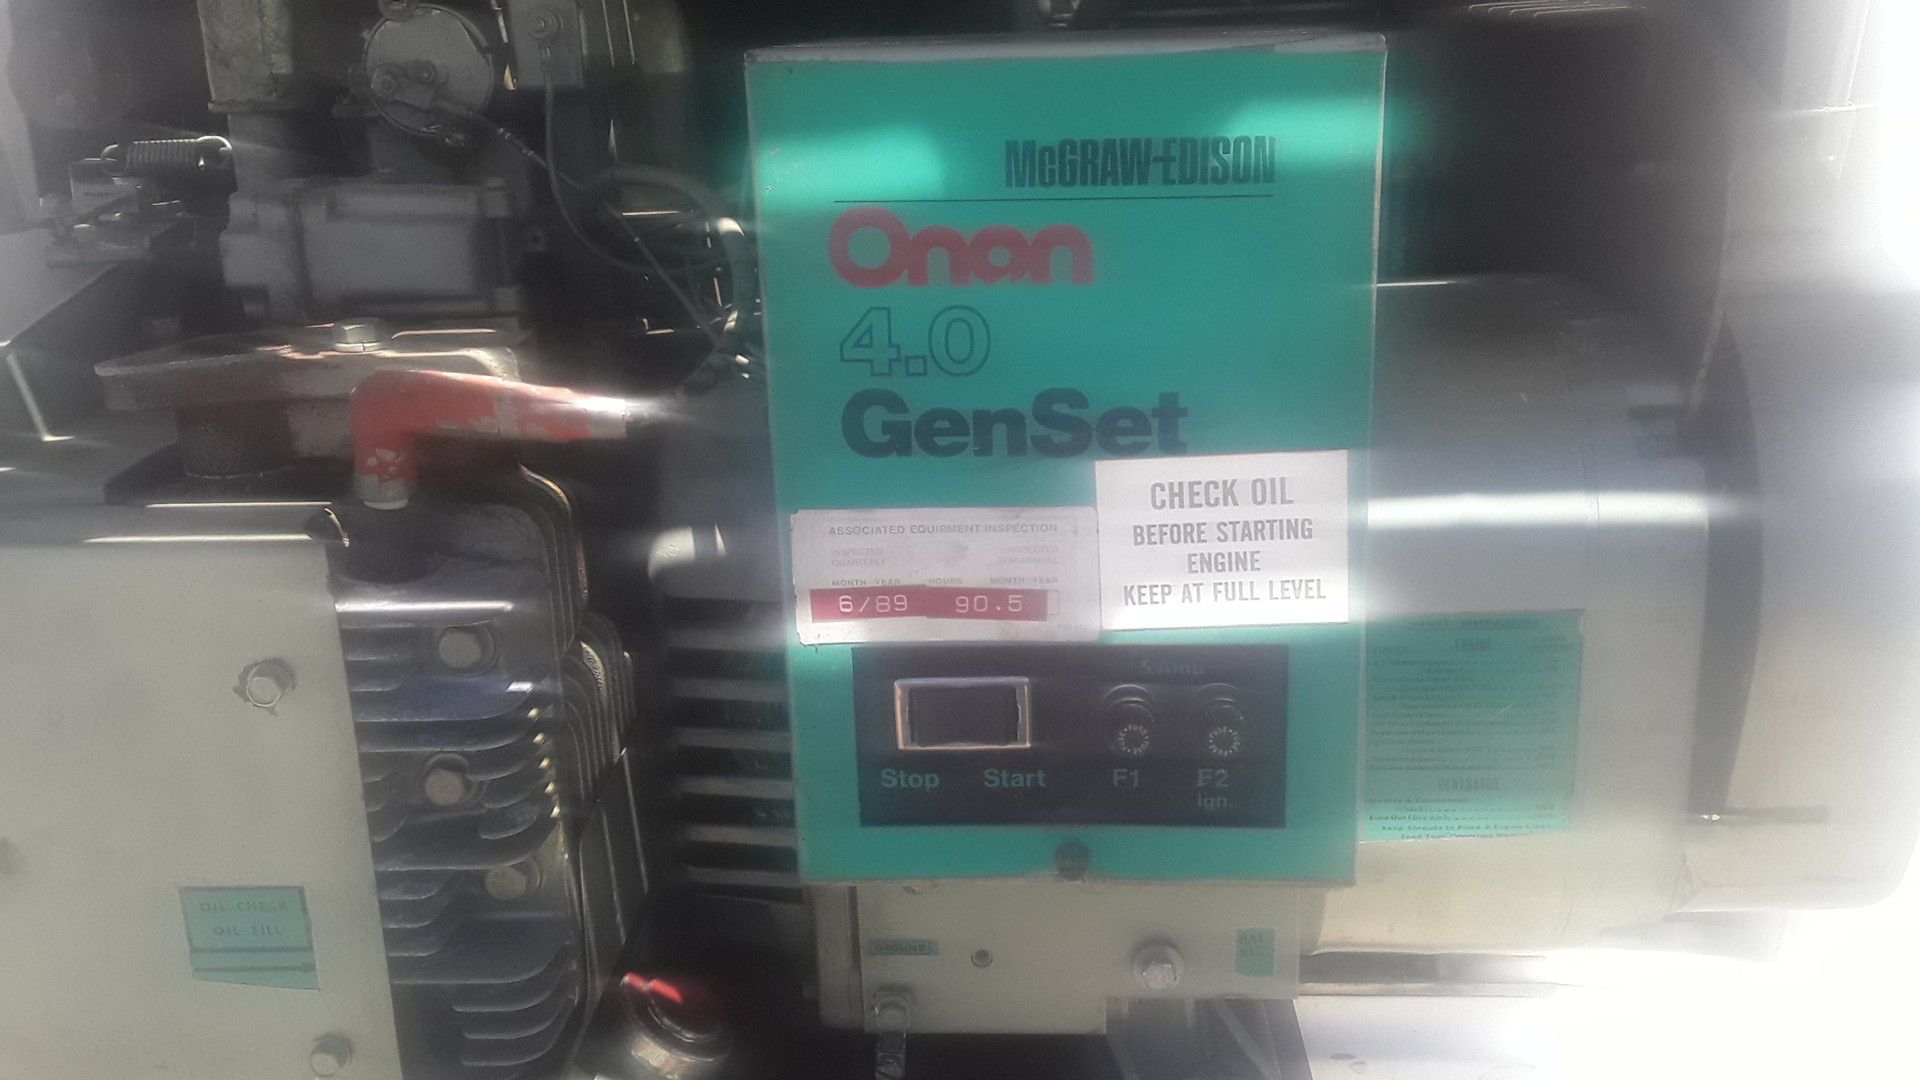 Onan genset 4.0 generator compressor plus workstation air tank electrical outlets and all wiring neede to install it